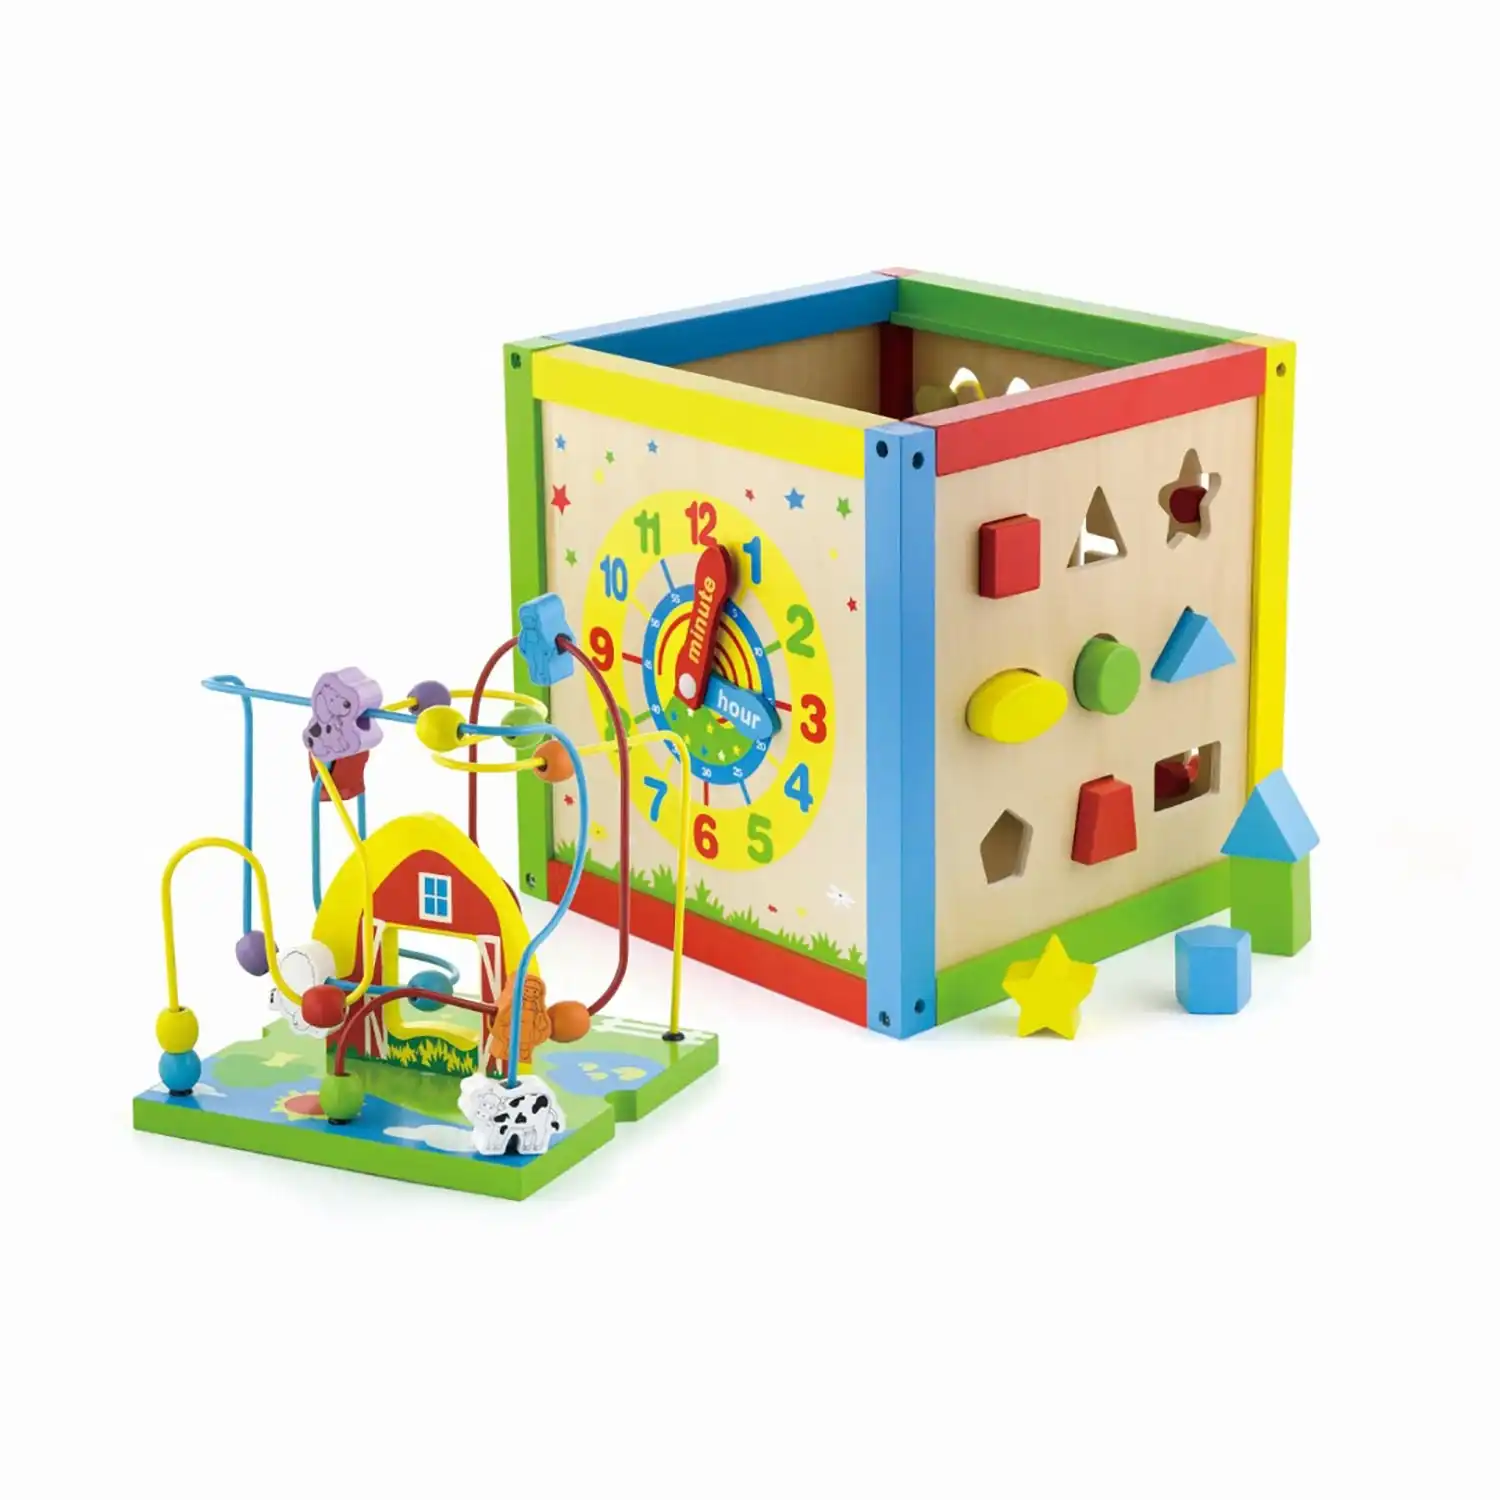 5-in-1 Activity Toy